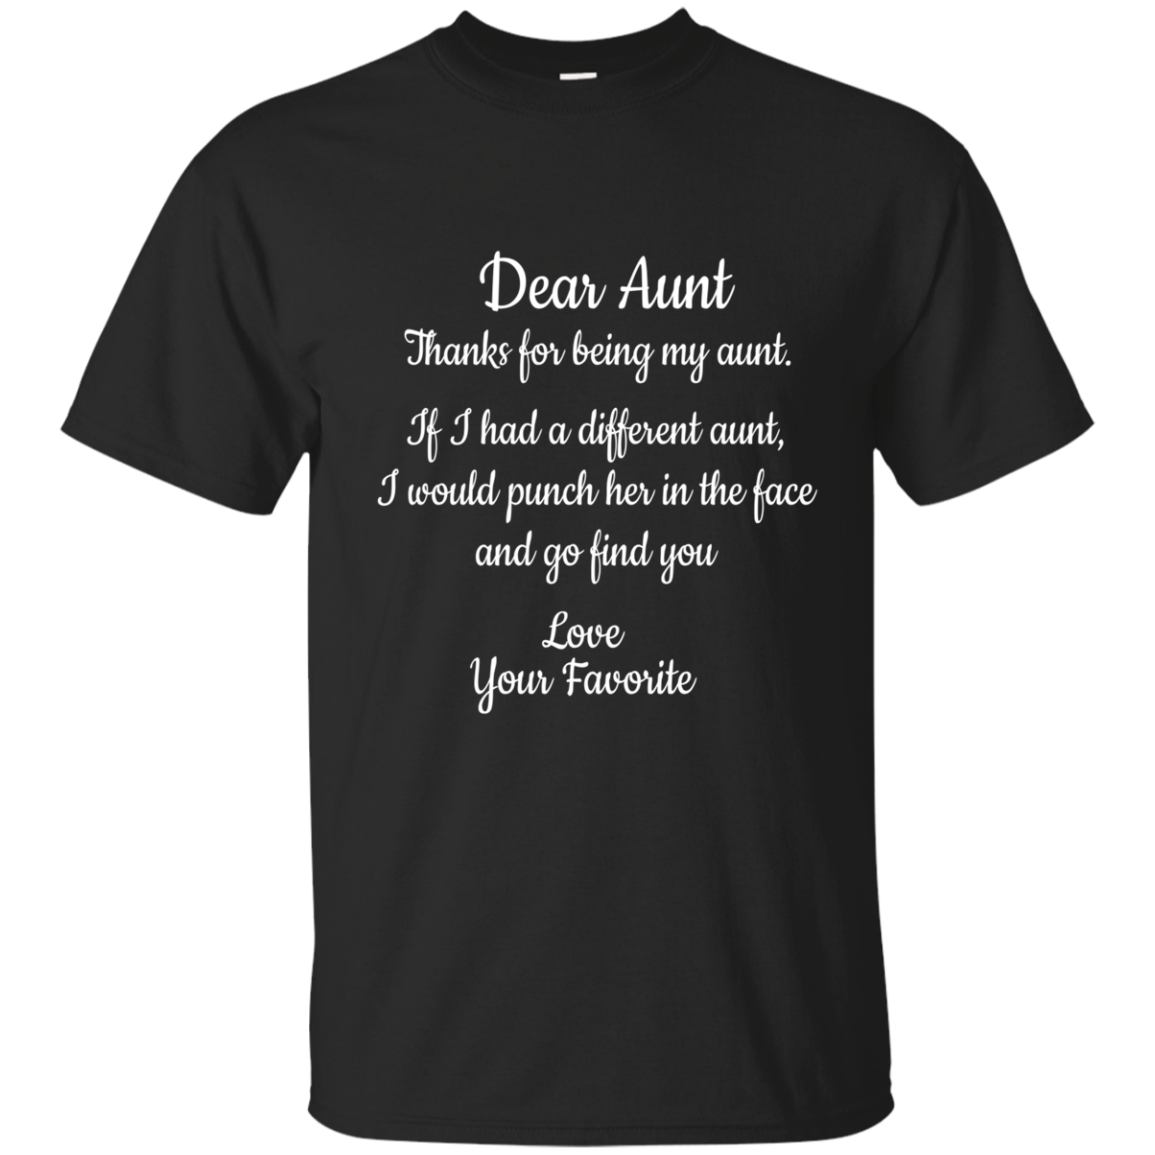 Dear Aunt Thanks for being my aunt shirt, hoodie, tank